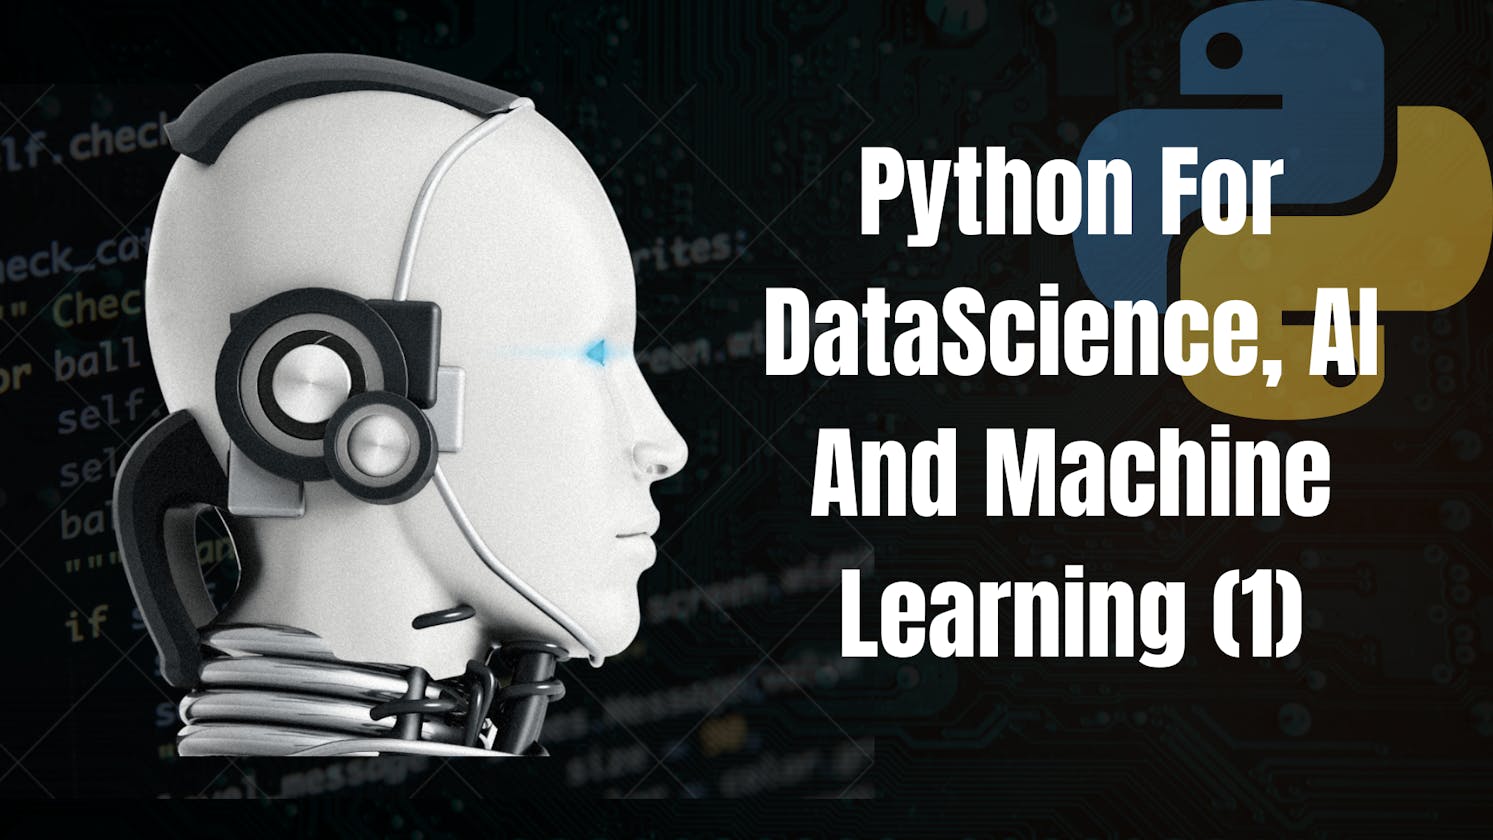 Python For DAM (DataScience, AI and Machine learning) Series